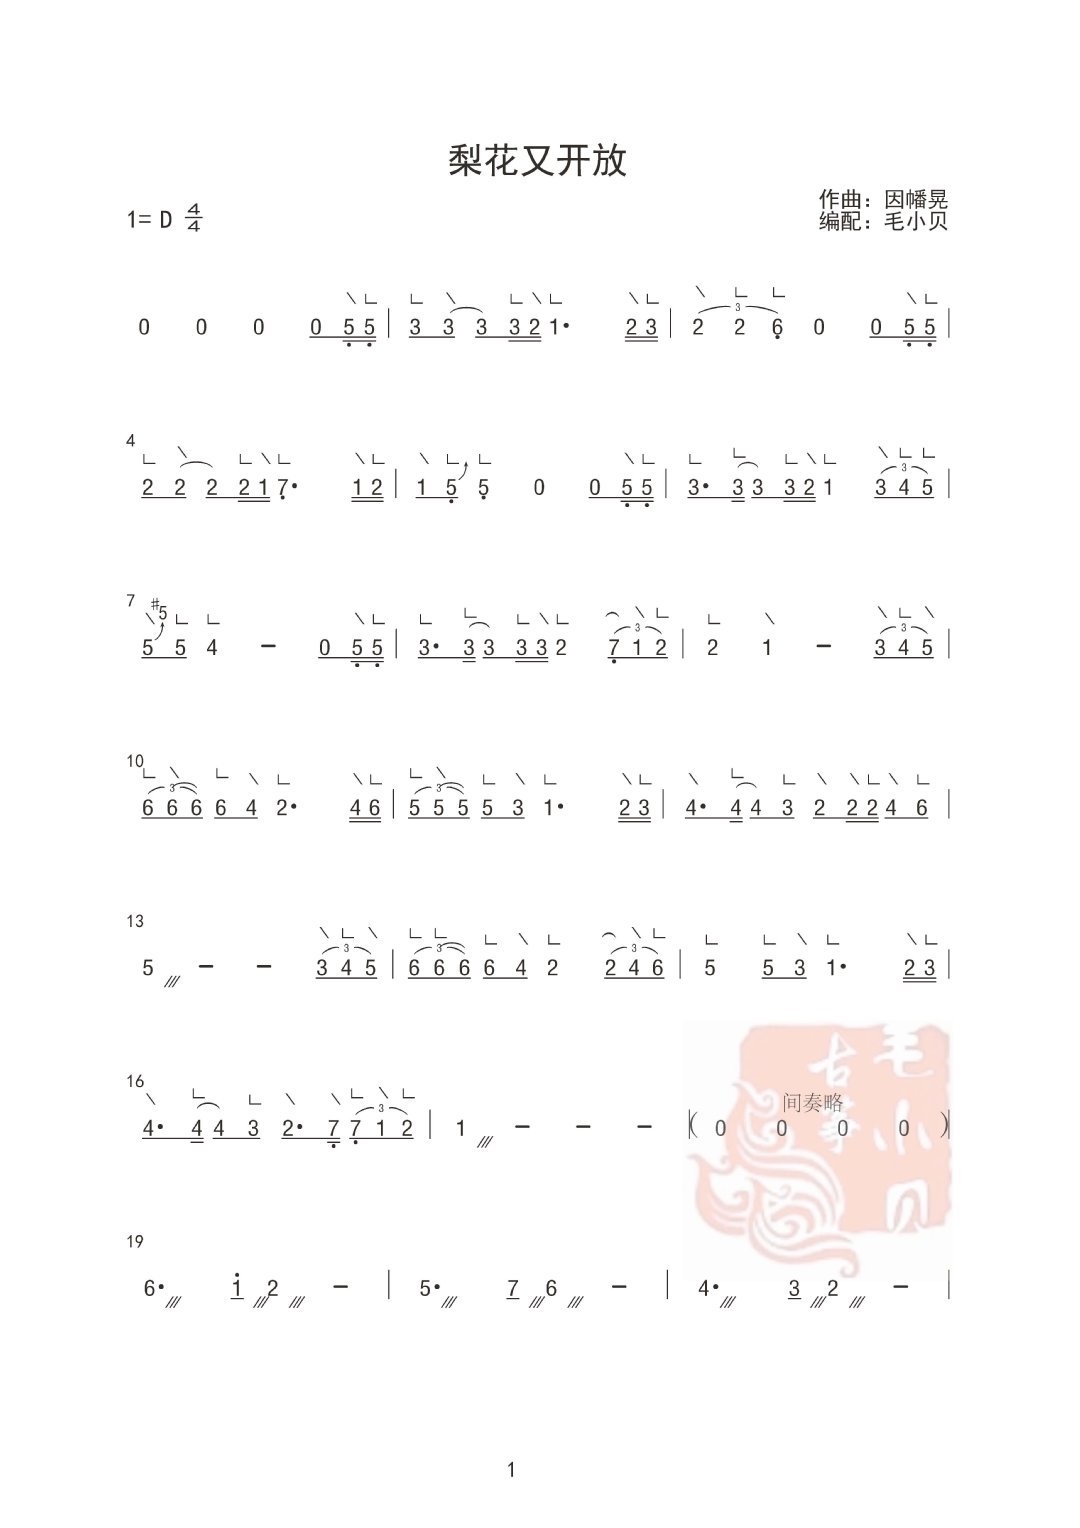 The pear flowers are blooming again（guzheng sheet music）